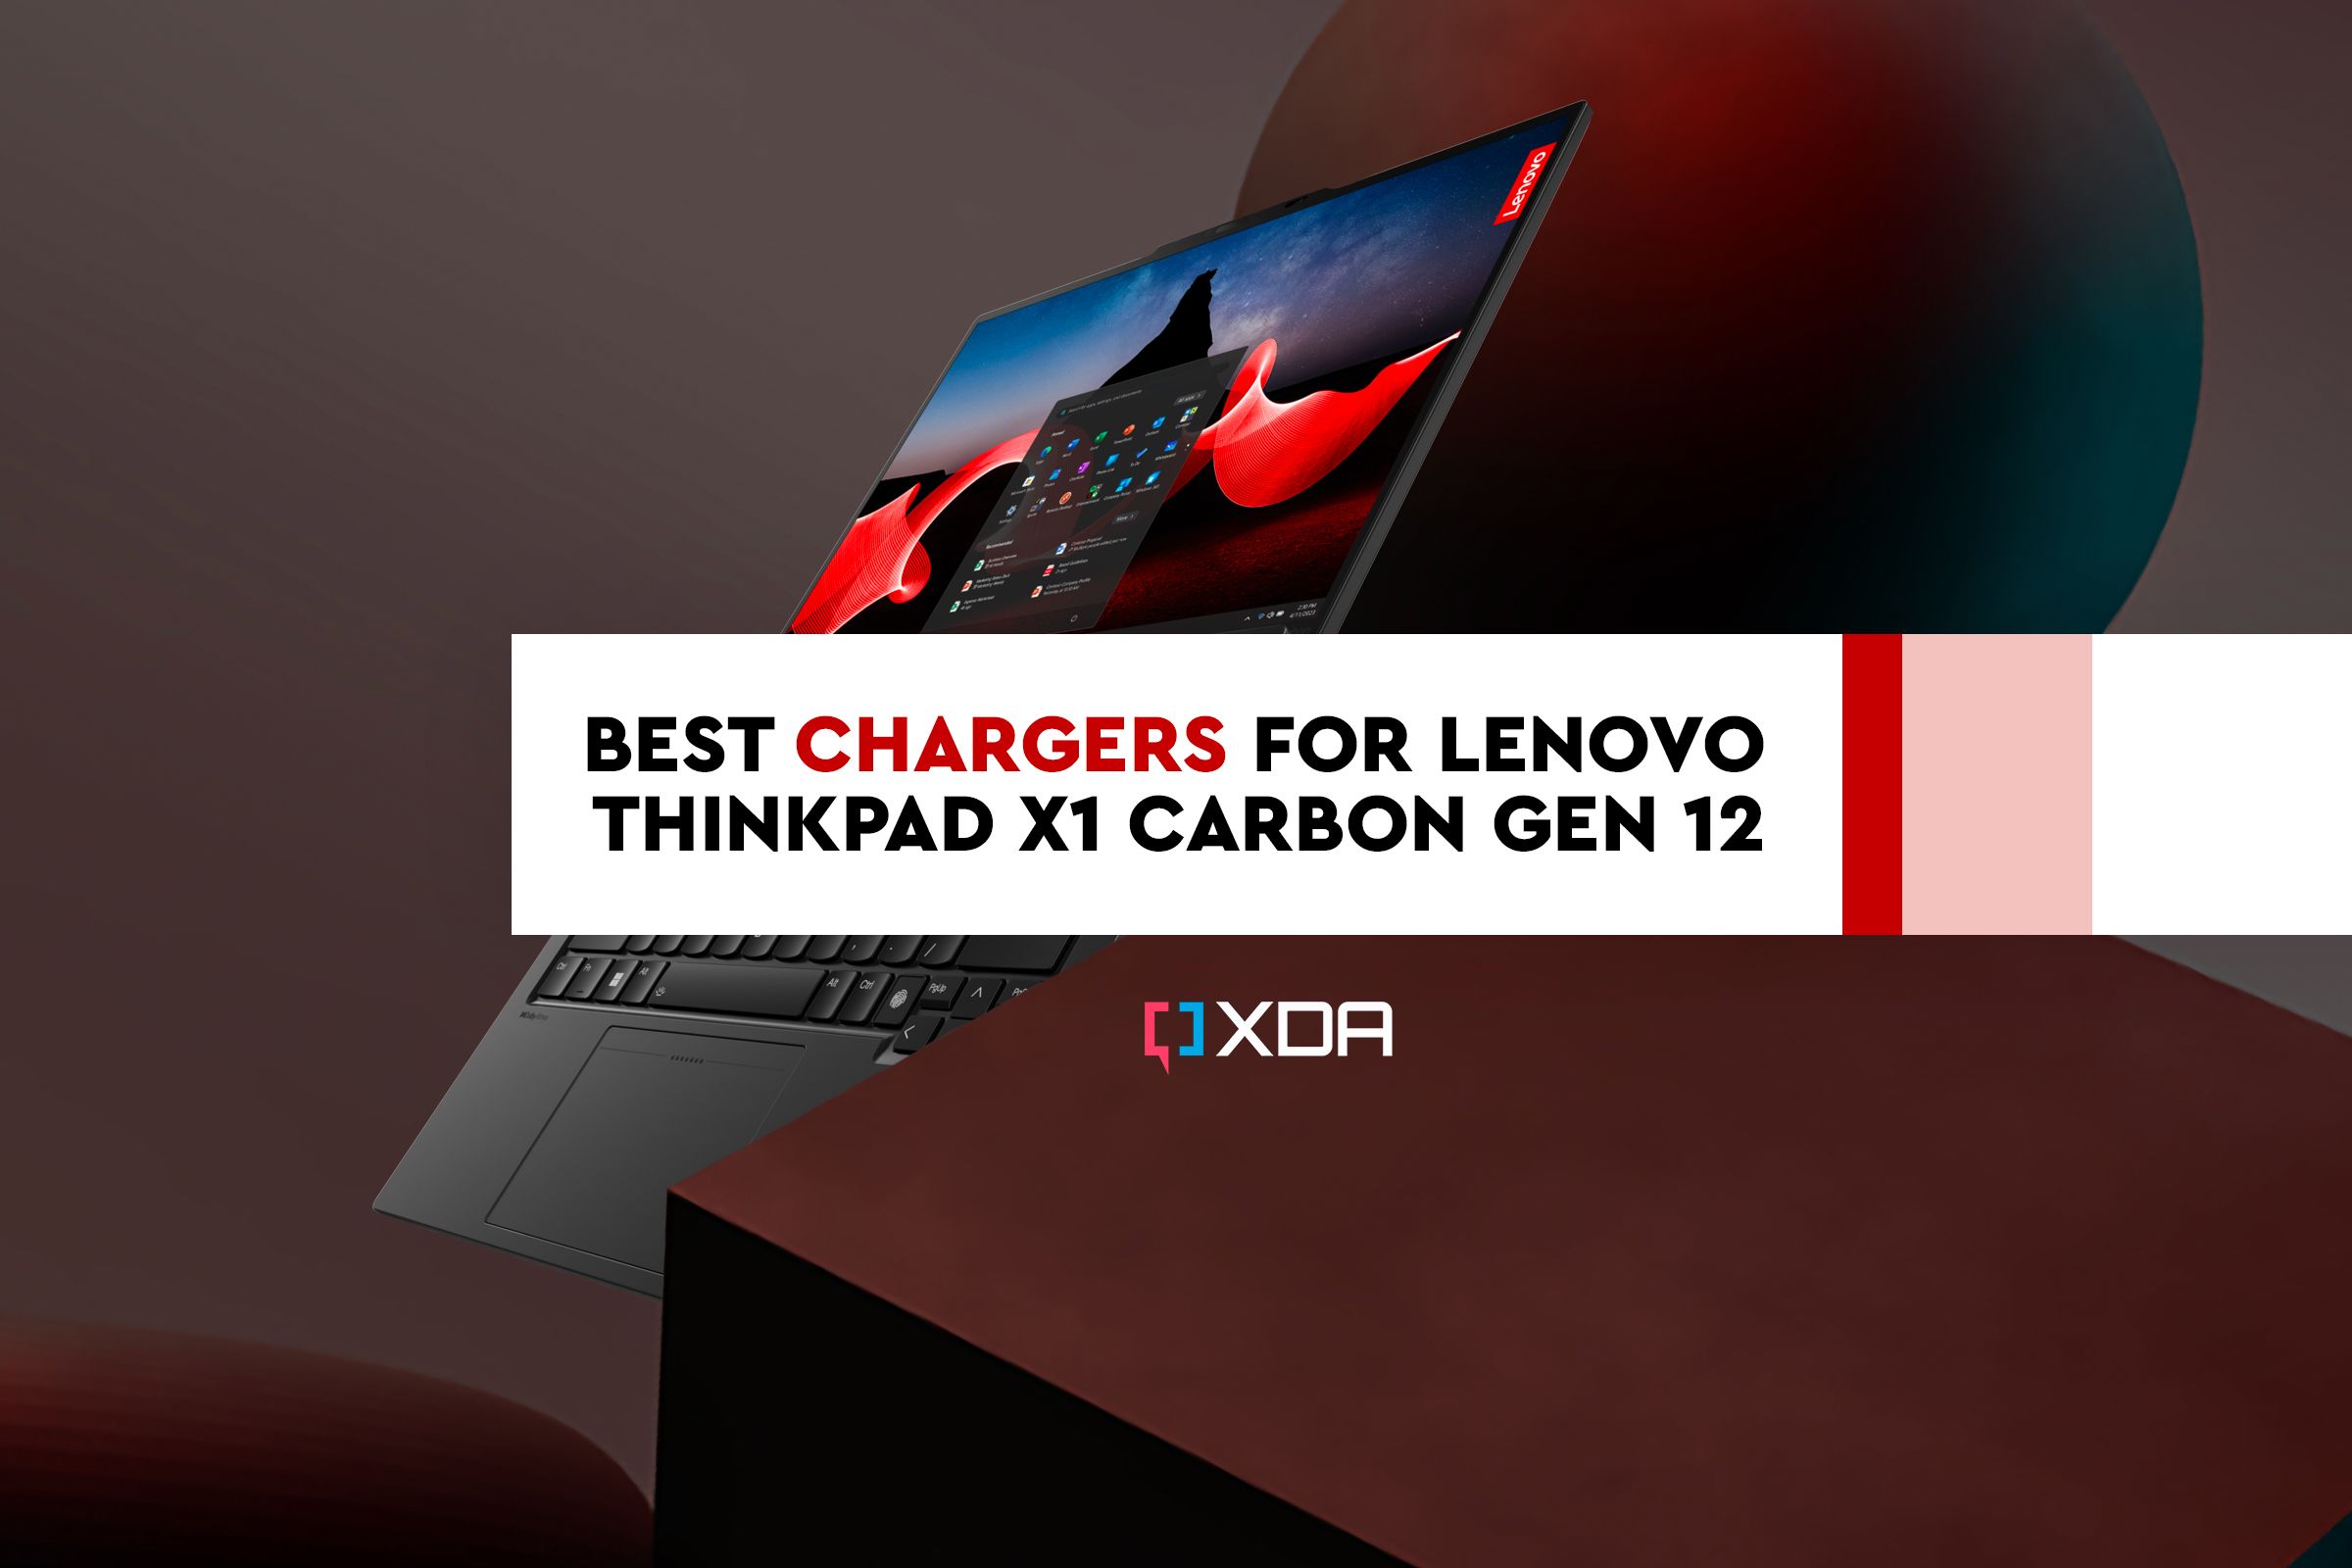 Best chargers for Lenovo ThinkPad X1 Carbon Gen 12